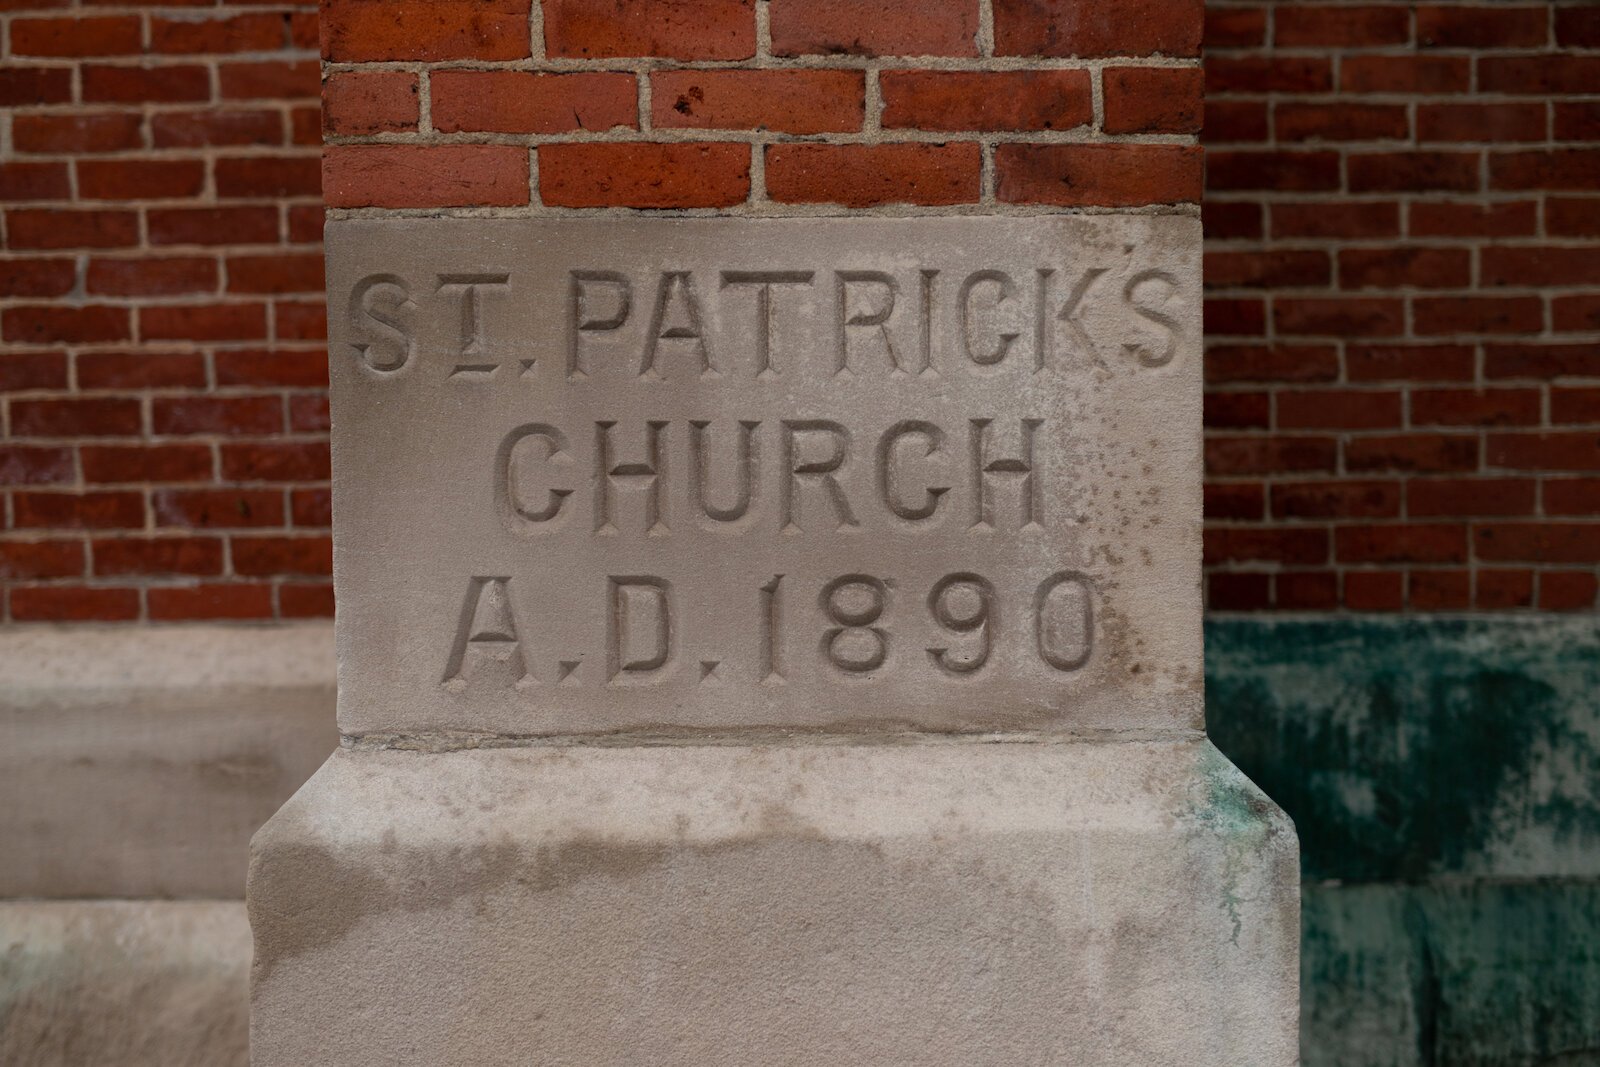 During the pandemic in 2020, Poplar Village Gardens grew and donated 1,300 pounds of food to St. Patrick’s Catholic Church’s Food Bank in Fort Wayne.